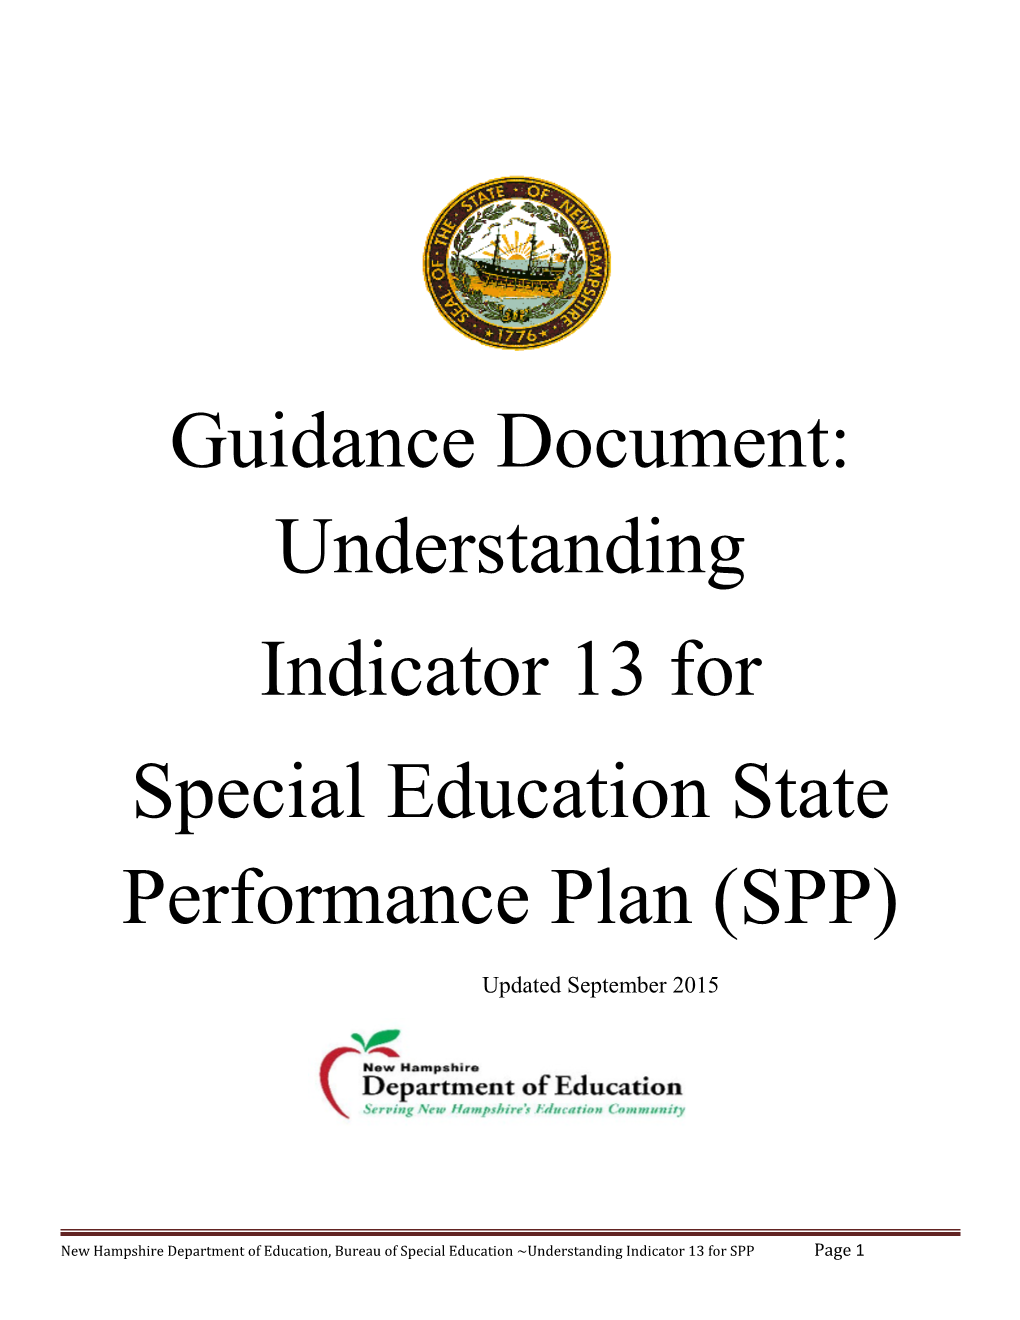 Special Education State Performance Plan (SPP)